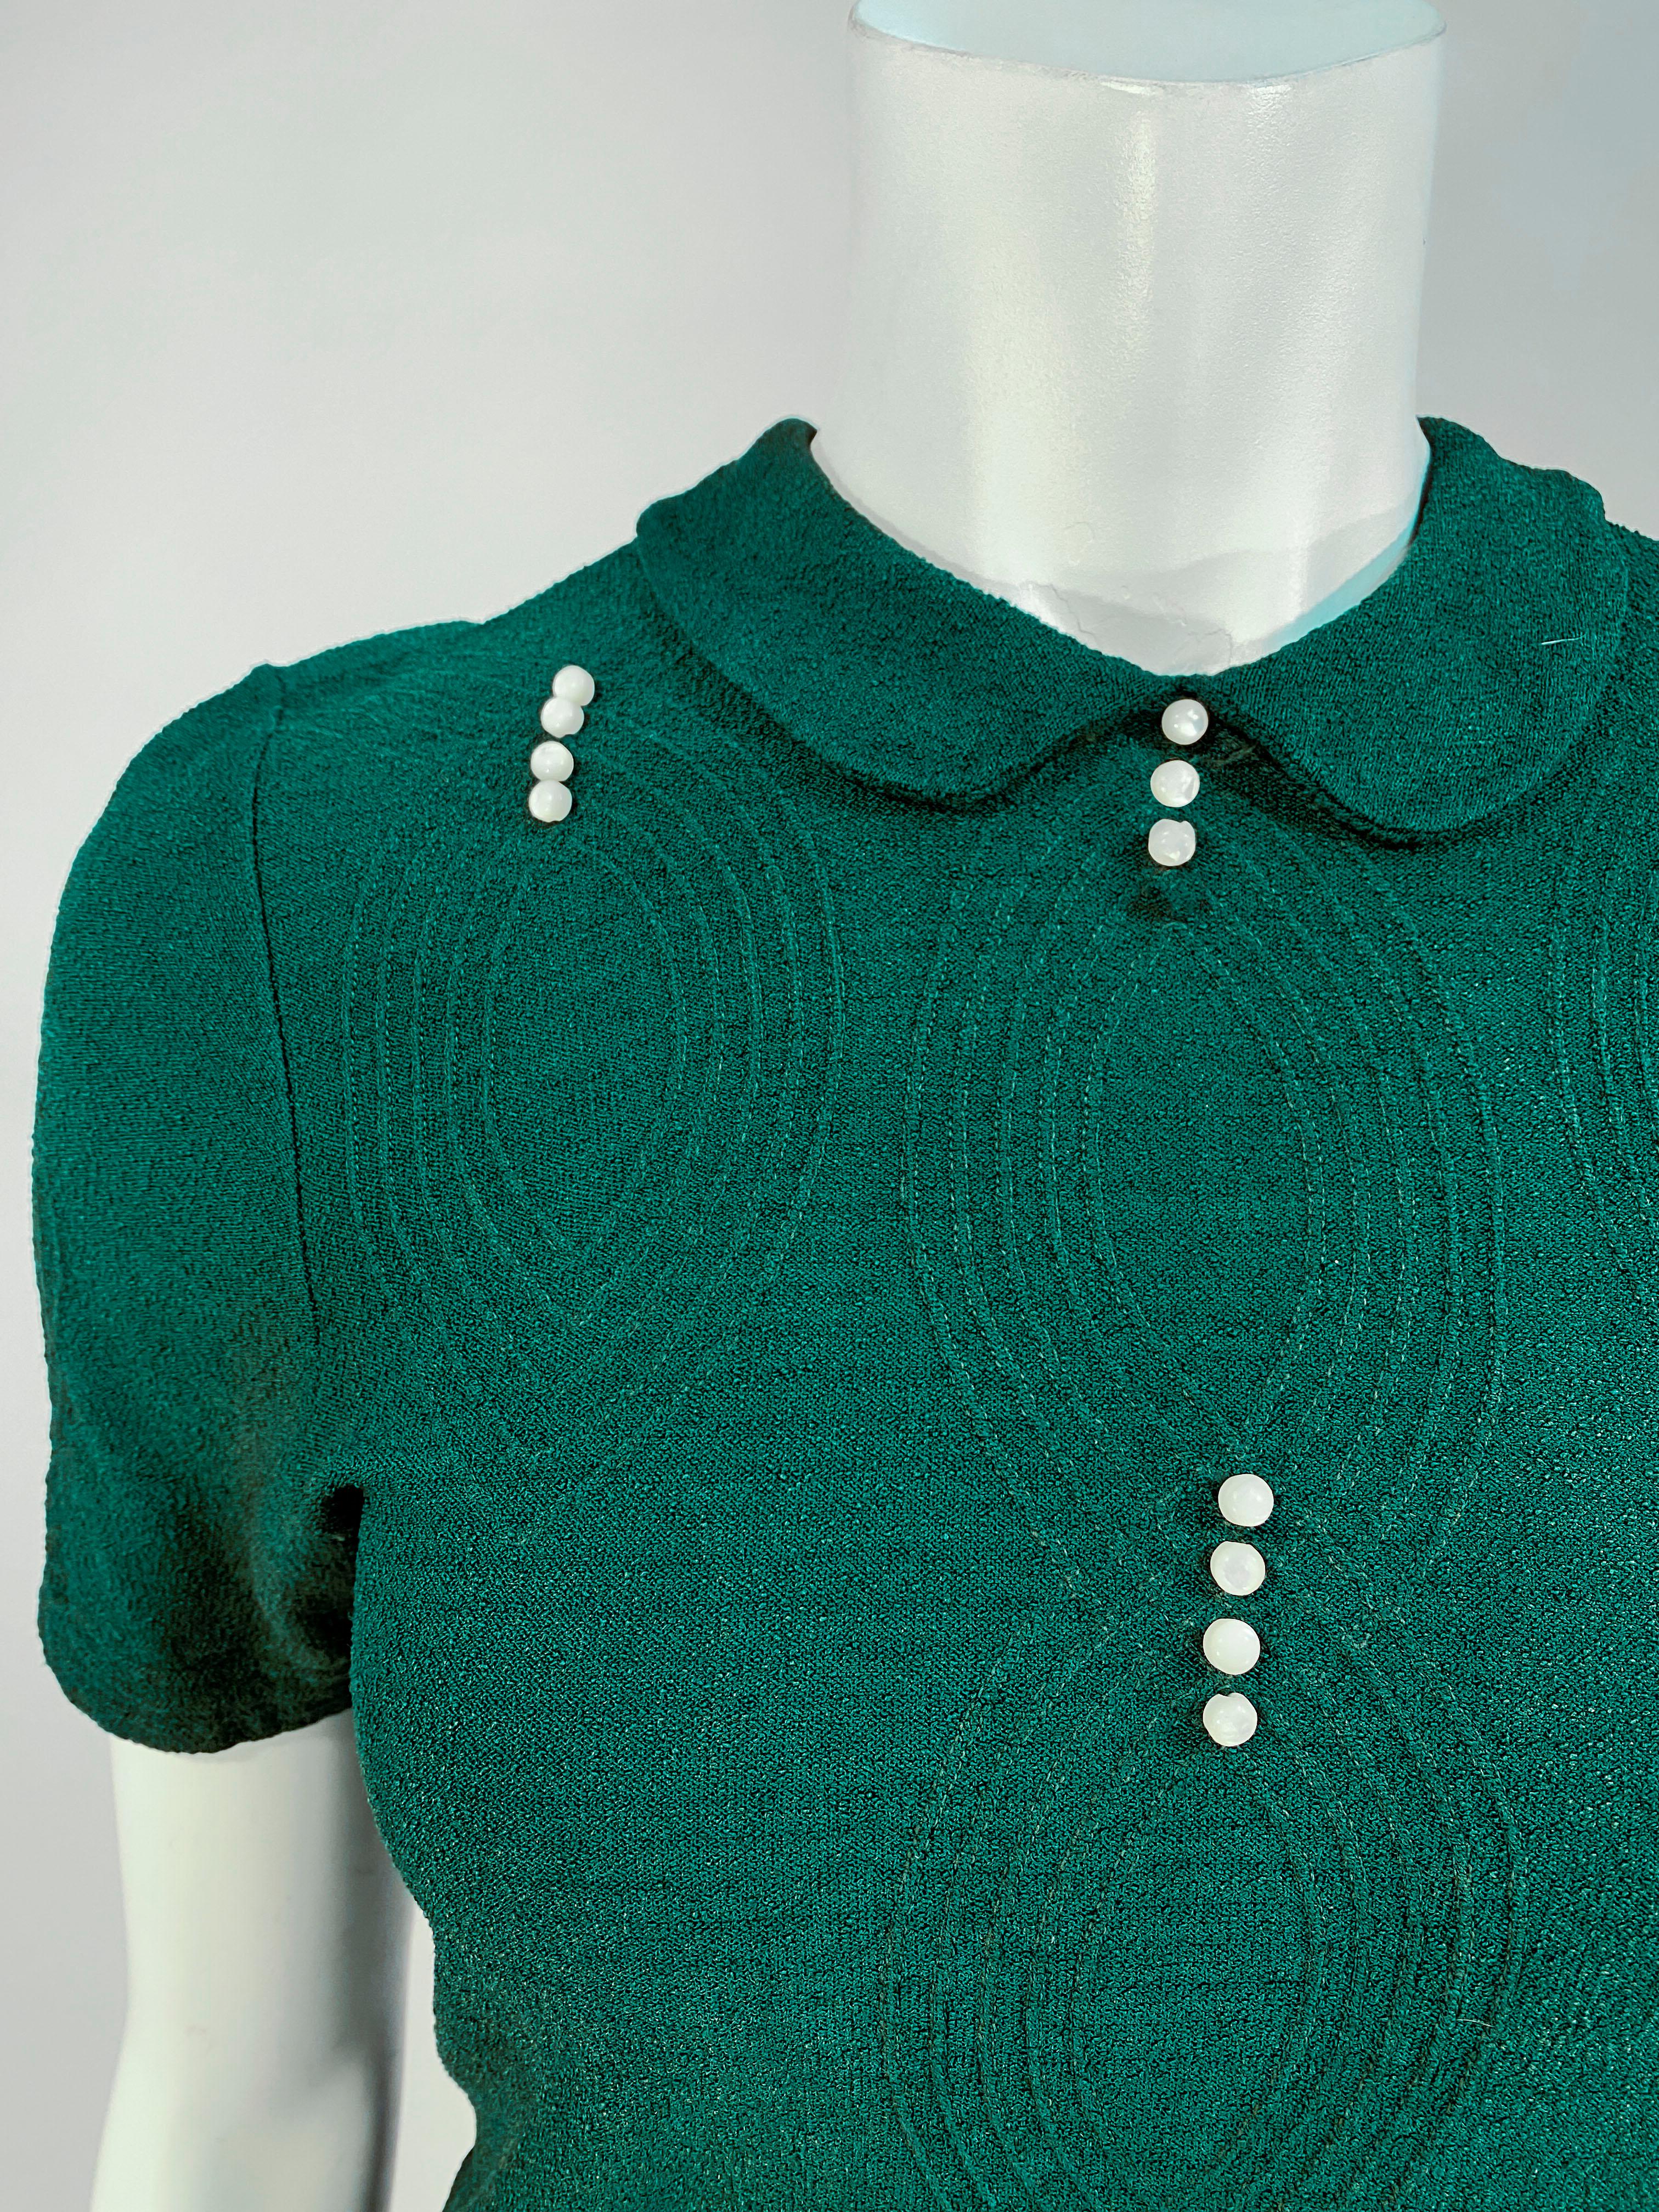 1940s Jack Frost forest green knit blouse with Art Deco patter accented with mother of pearl shell buttons, a petter pan collar, short sleeves, and flattering darts on was it and bust. 7-inch metal zip closure on the back of the neck.